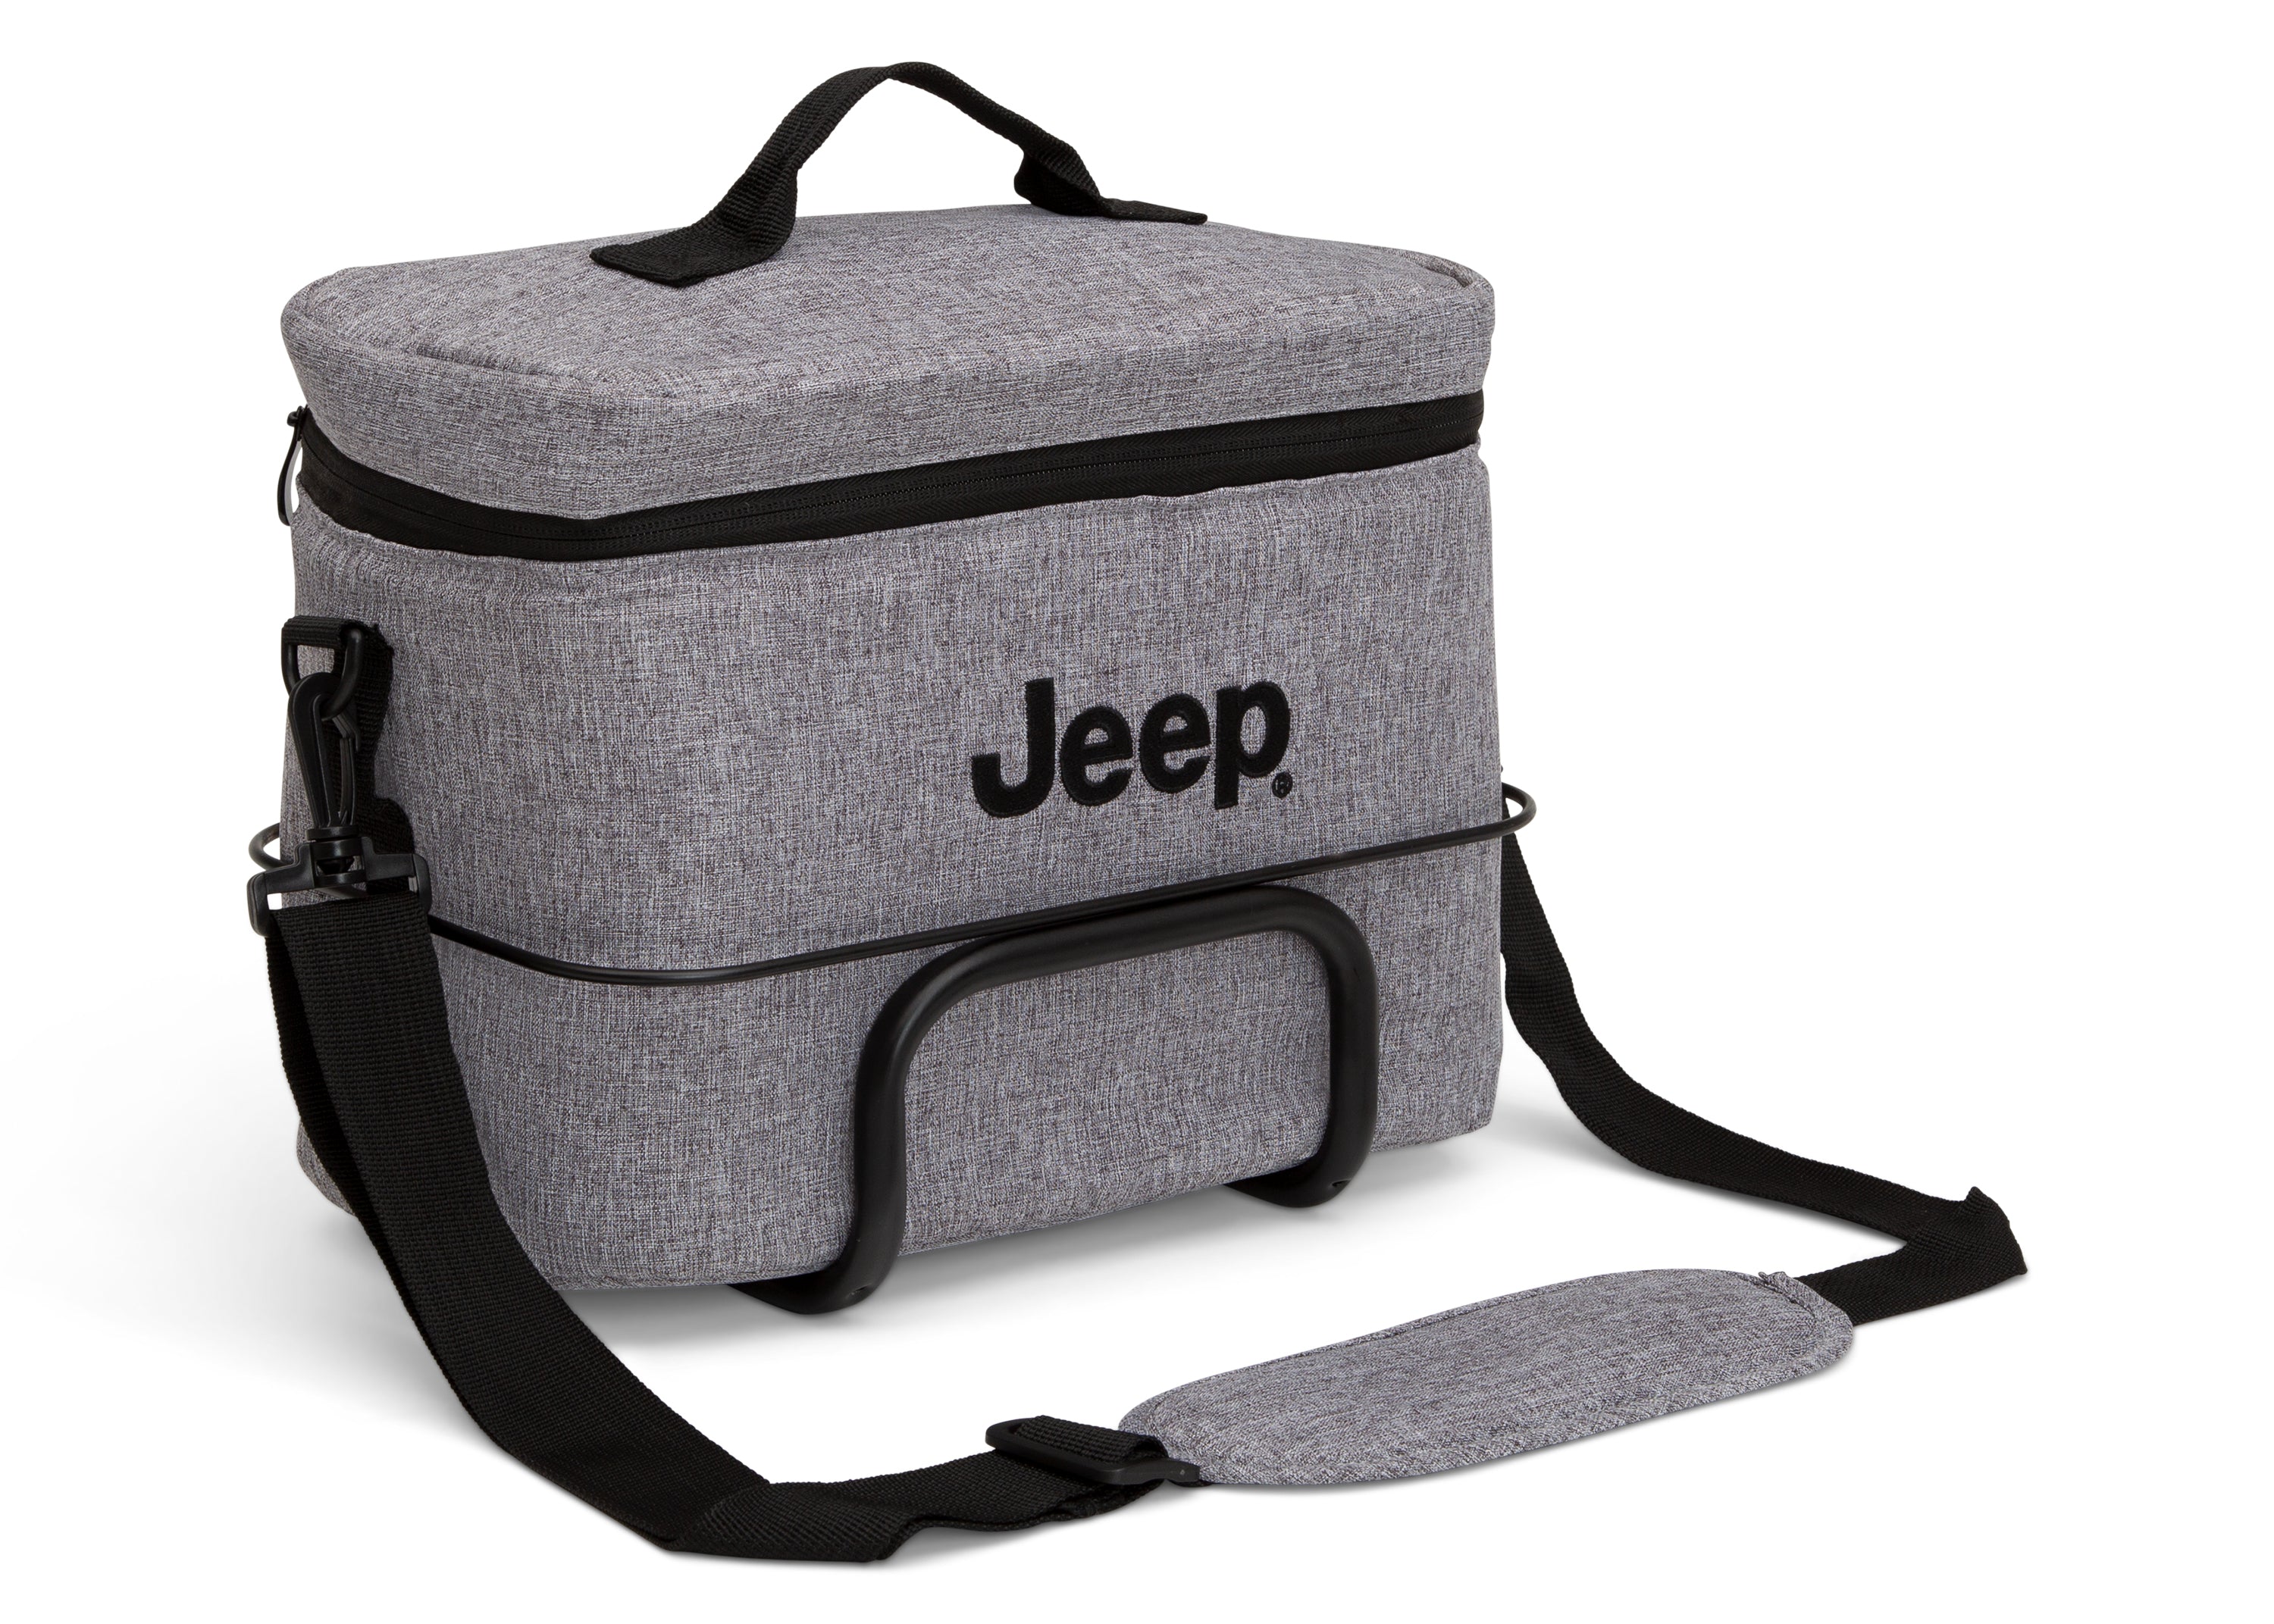 Jeep Wrangler Cooler Bag and Frame by Delta Children (Works with Jeep